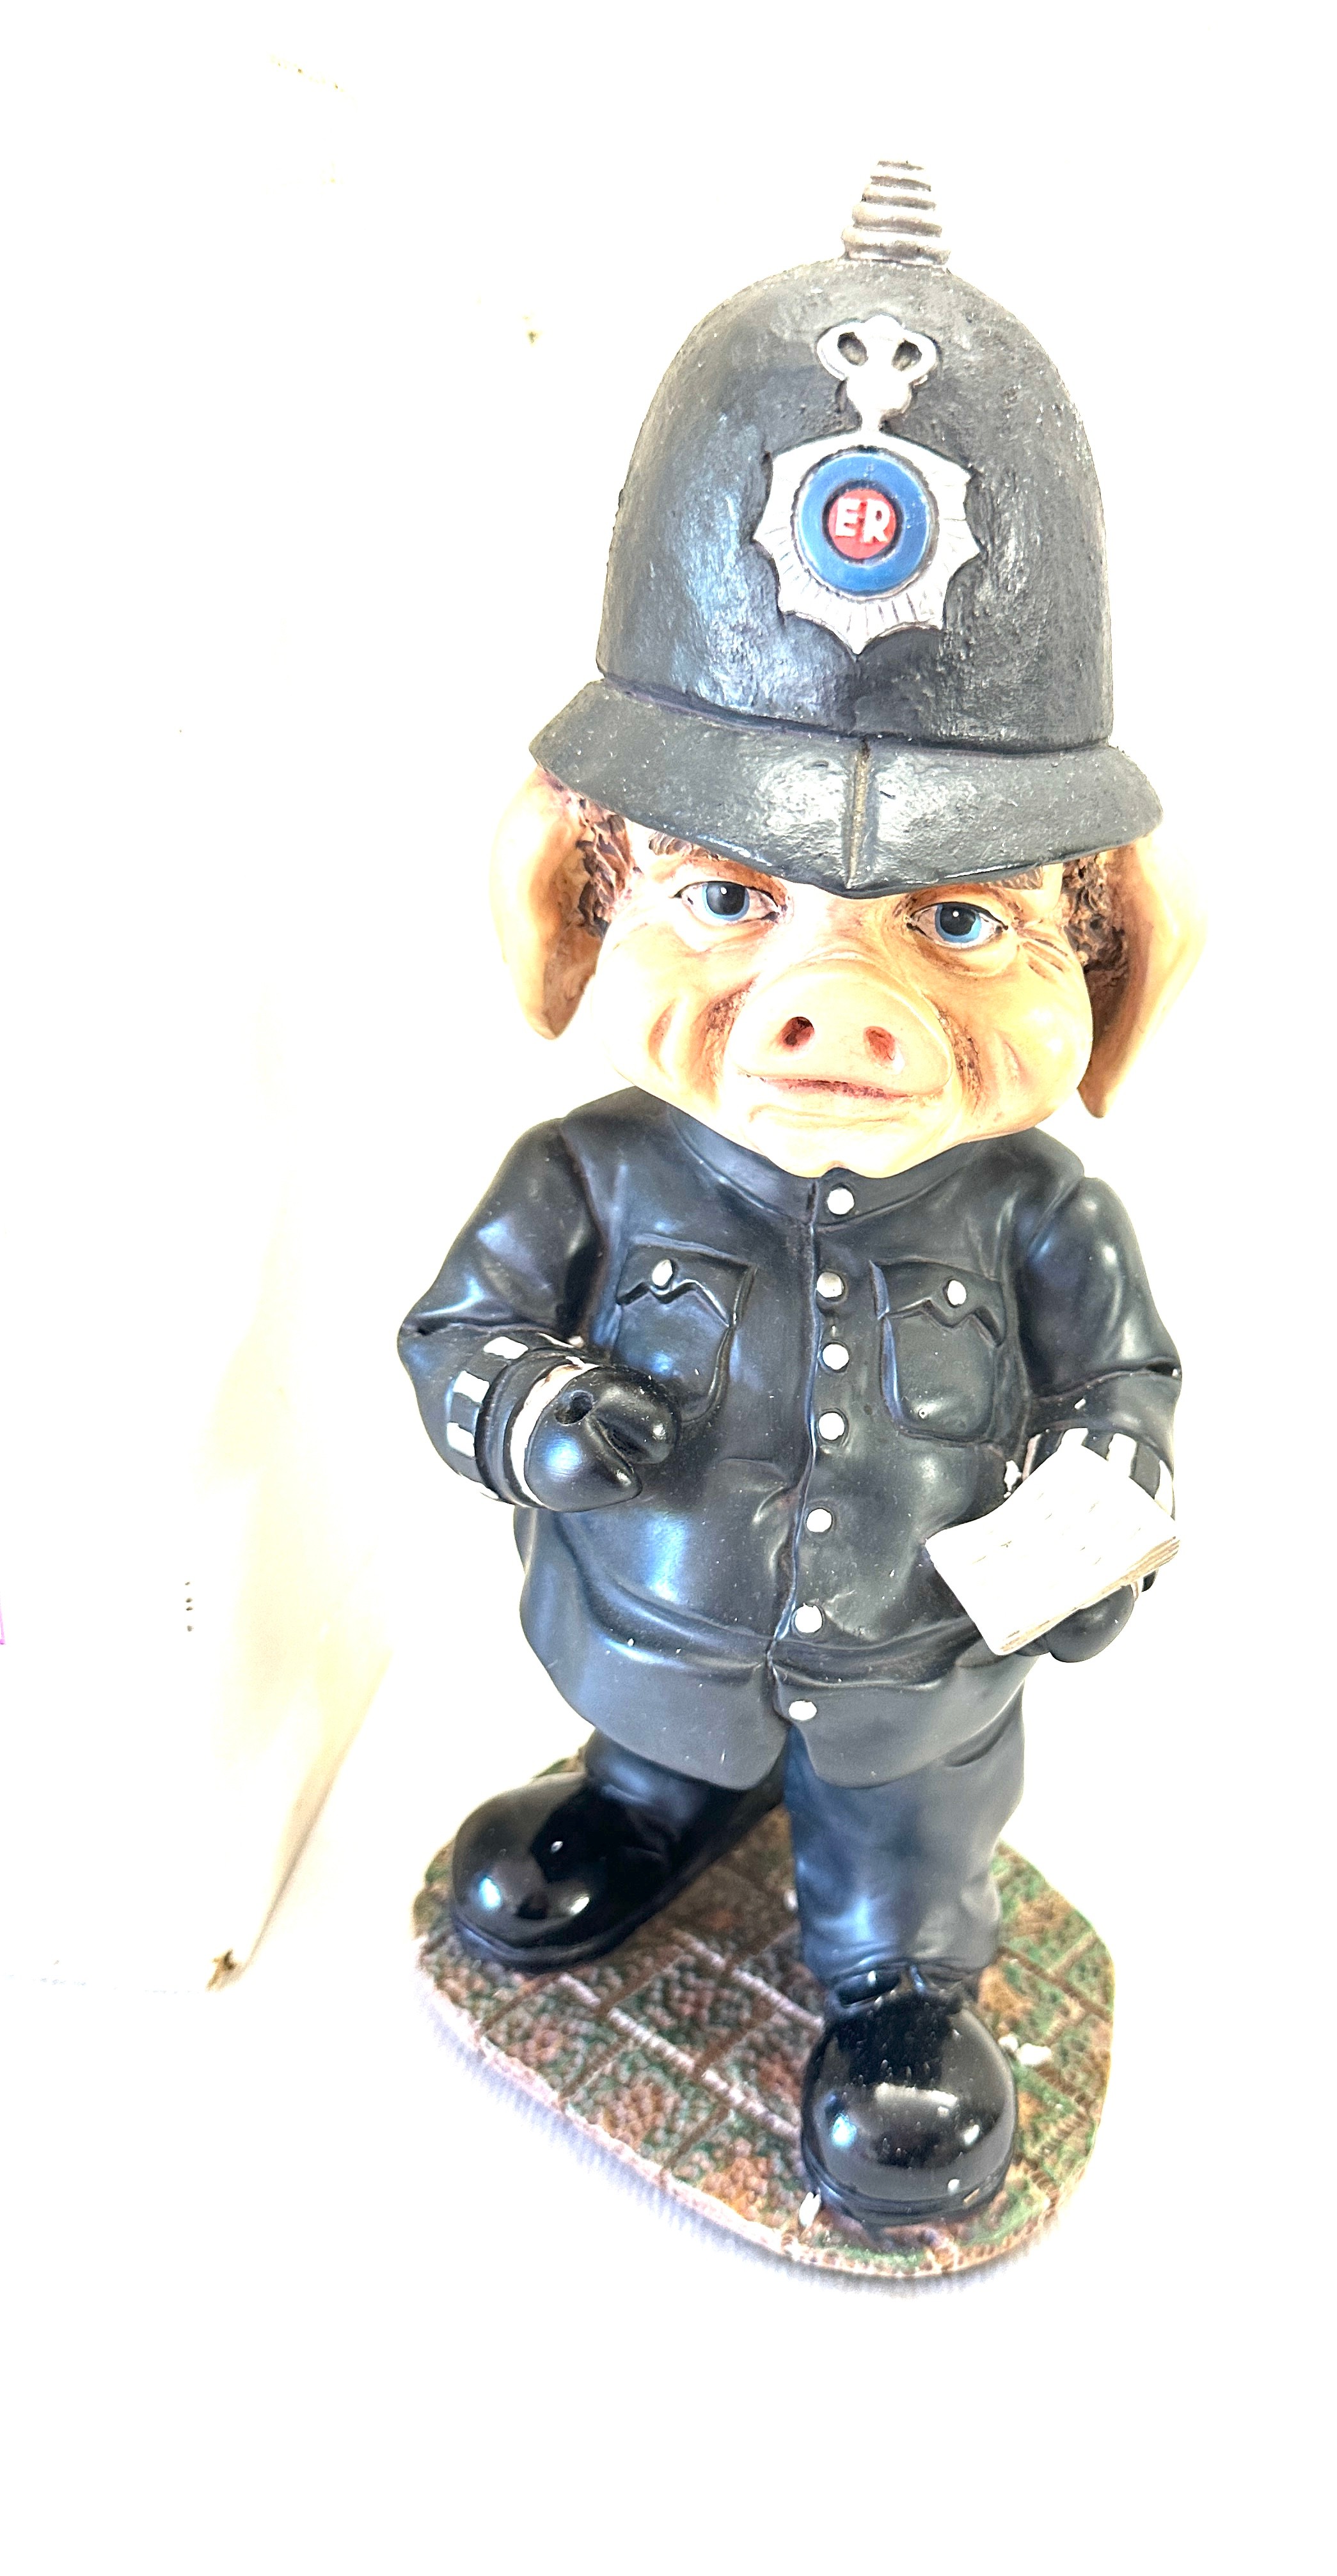 Vintage resin pig policeman figure measures approx 13 inches tall - Image 2 of 4